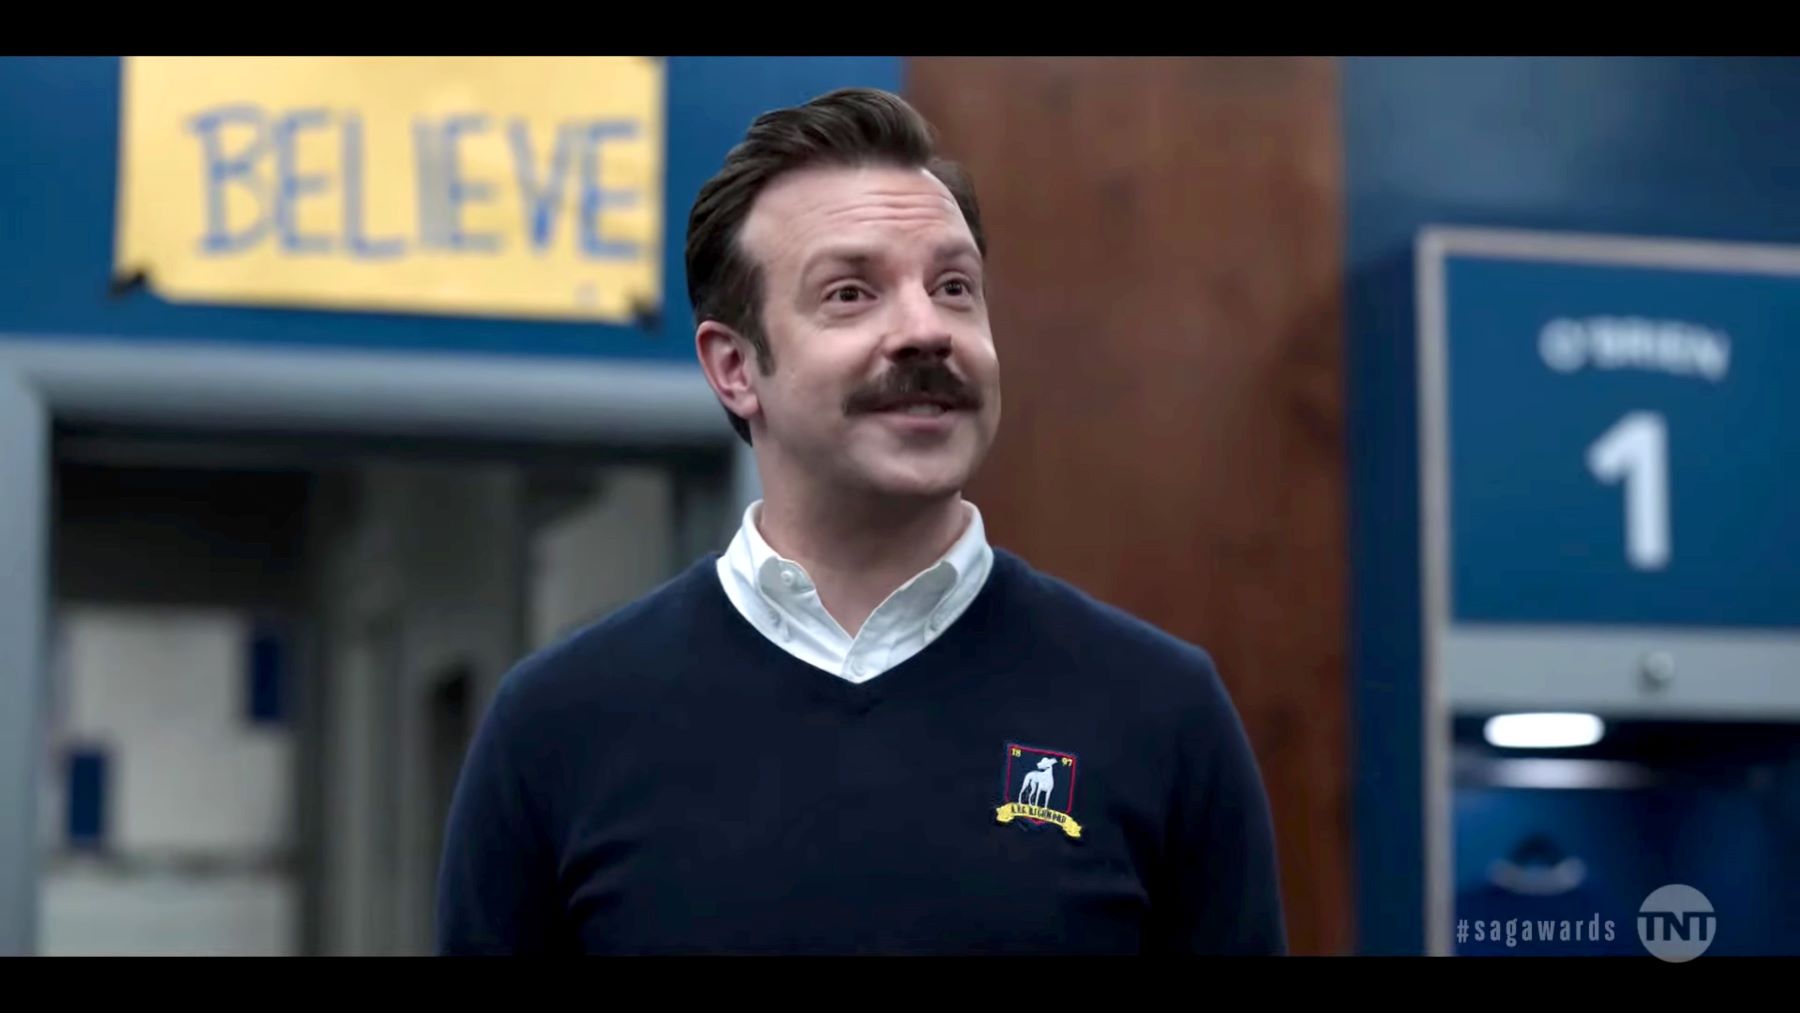 Jason Sudeikis as Ted Lasso on the show 'Ted Lasso'